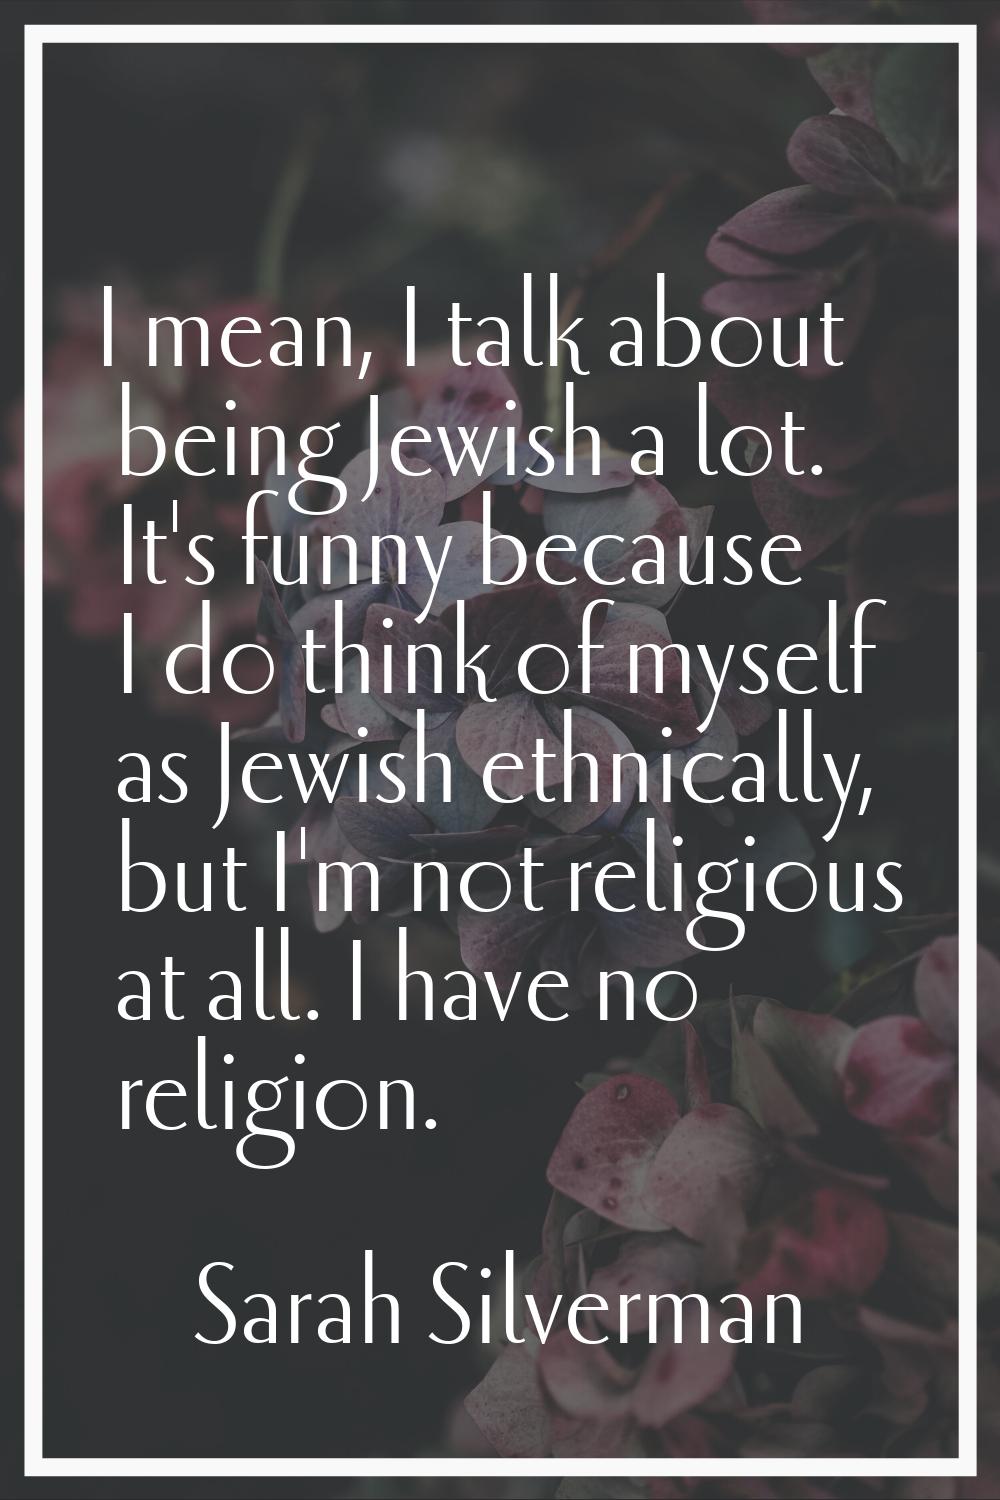 I mean, I talk about being Jewish a lot. It's funny because I do think of myself as Jewish ethnical